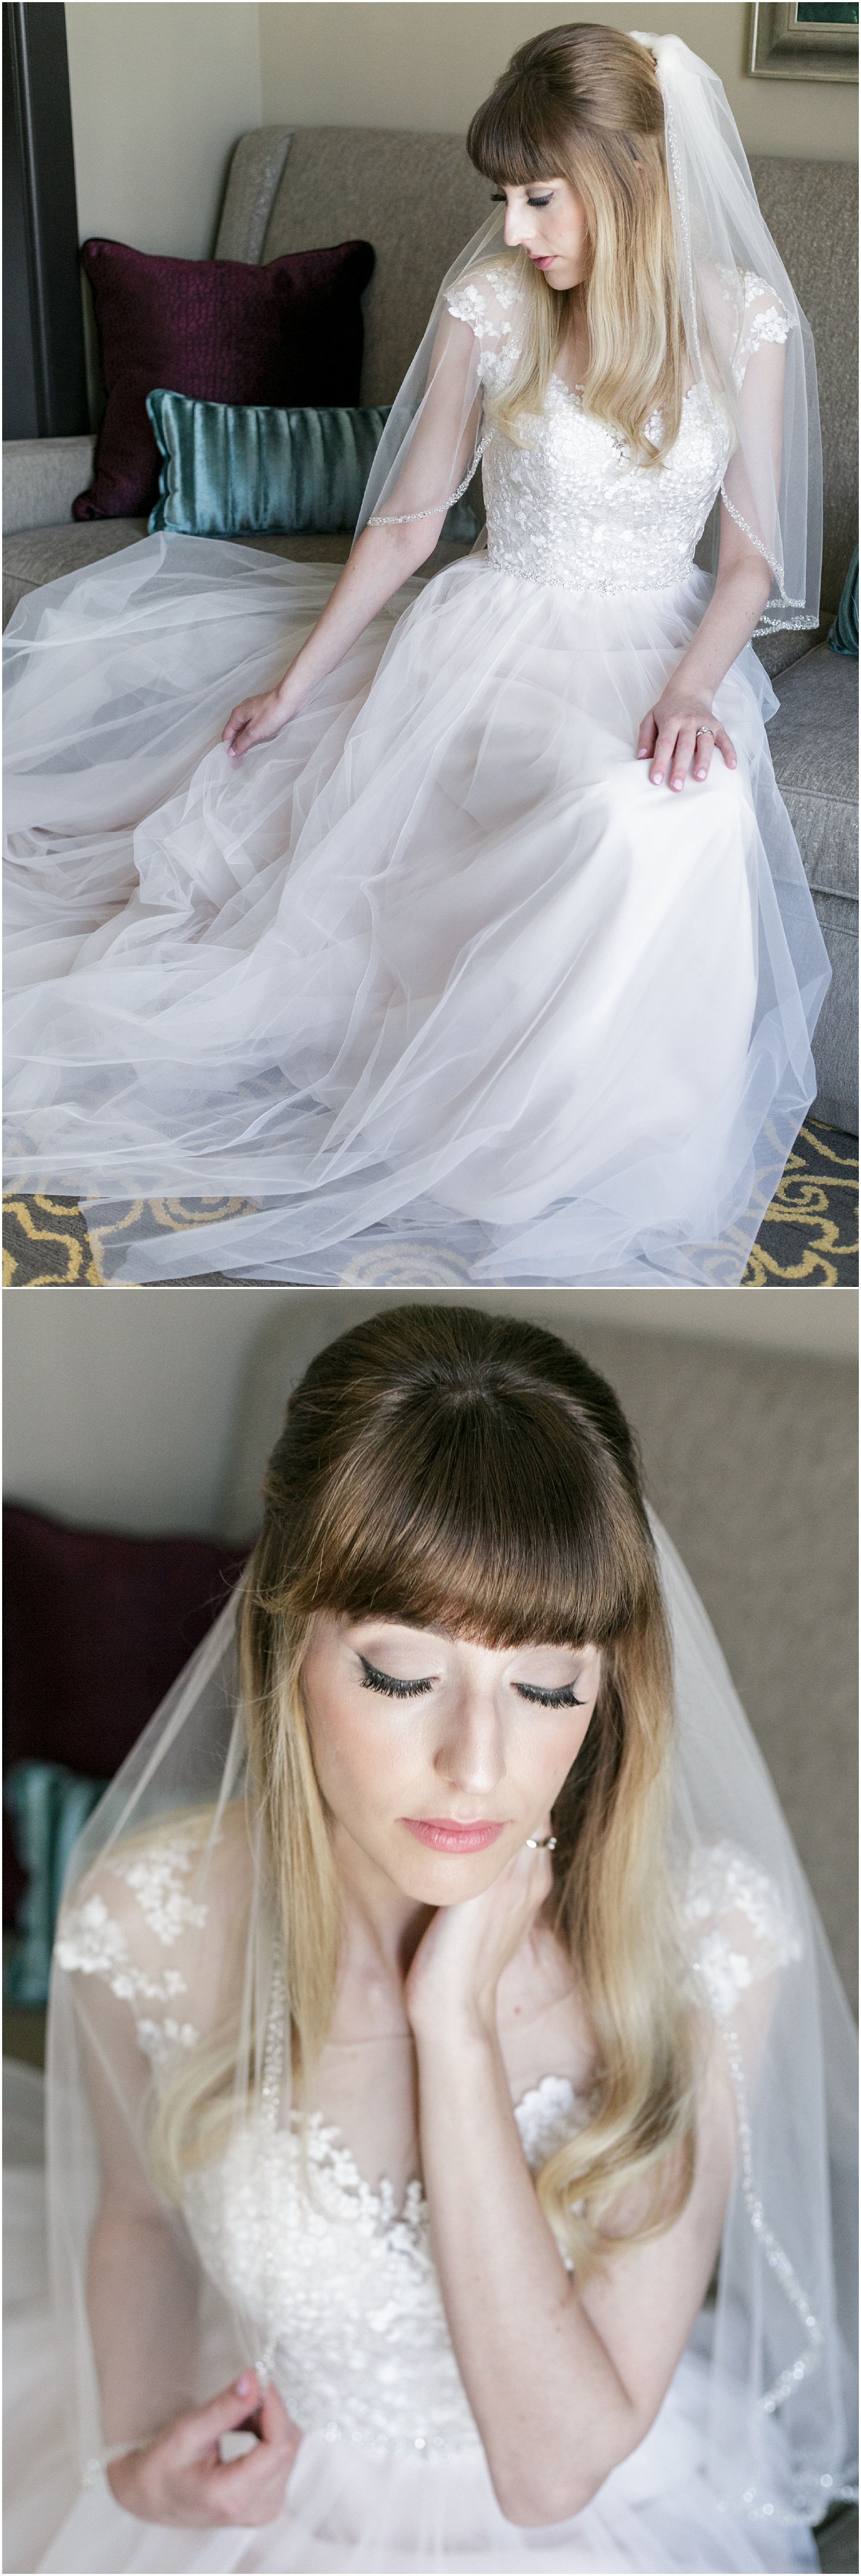 Bride showing off her dress and makeup while she waits to go to her elopement.